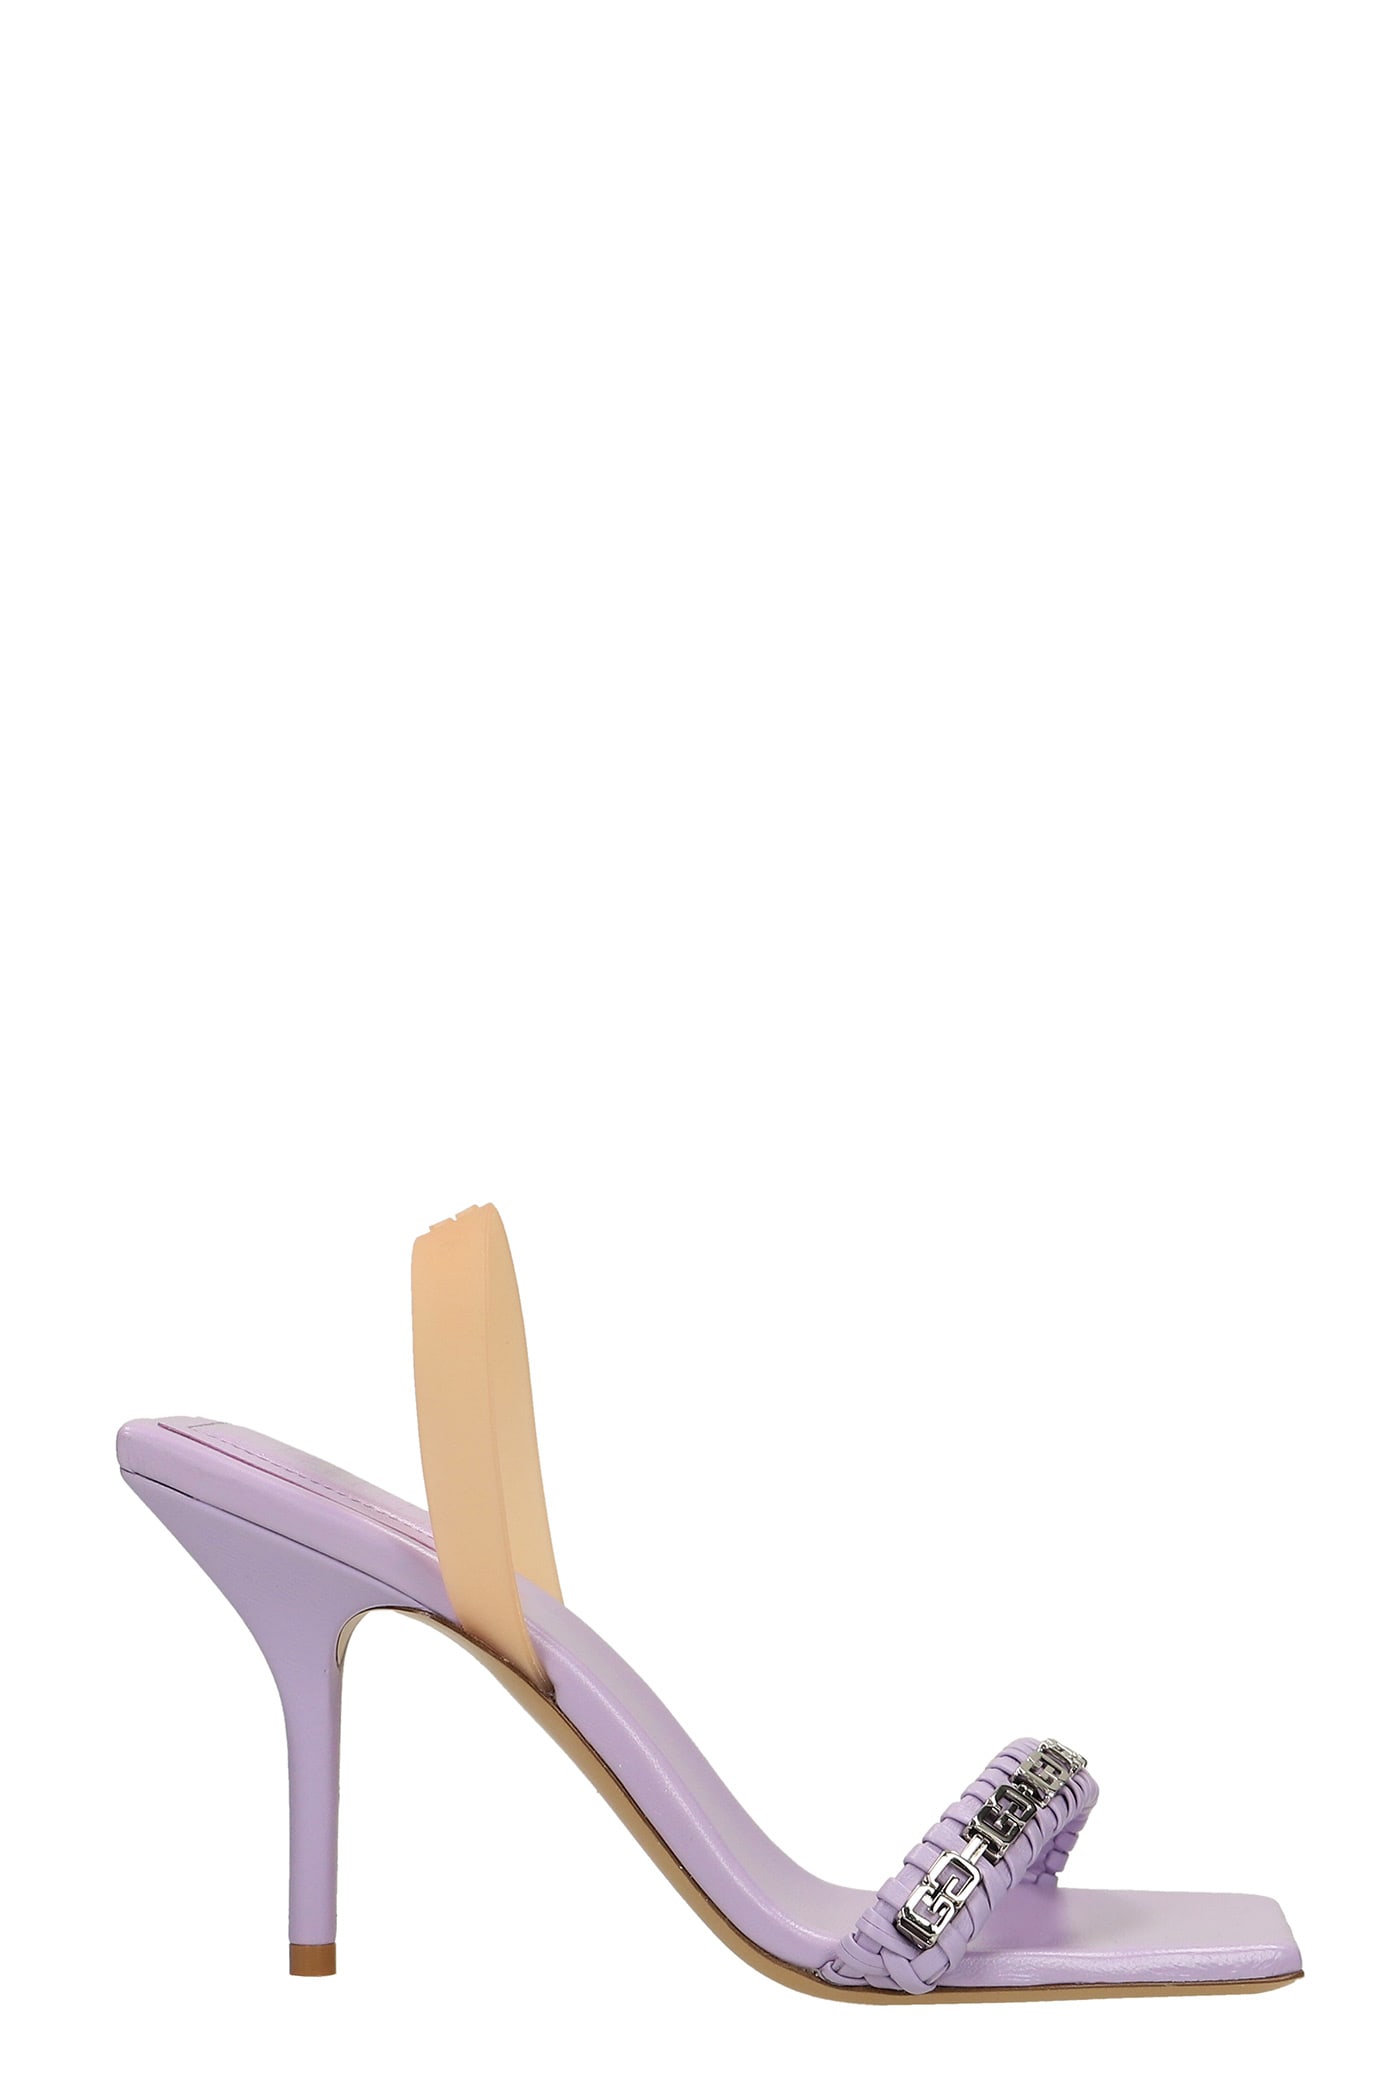 Givenchy Sandals In Viola Leather